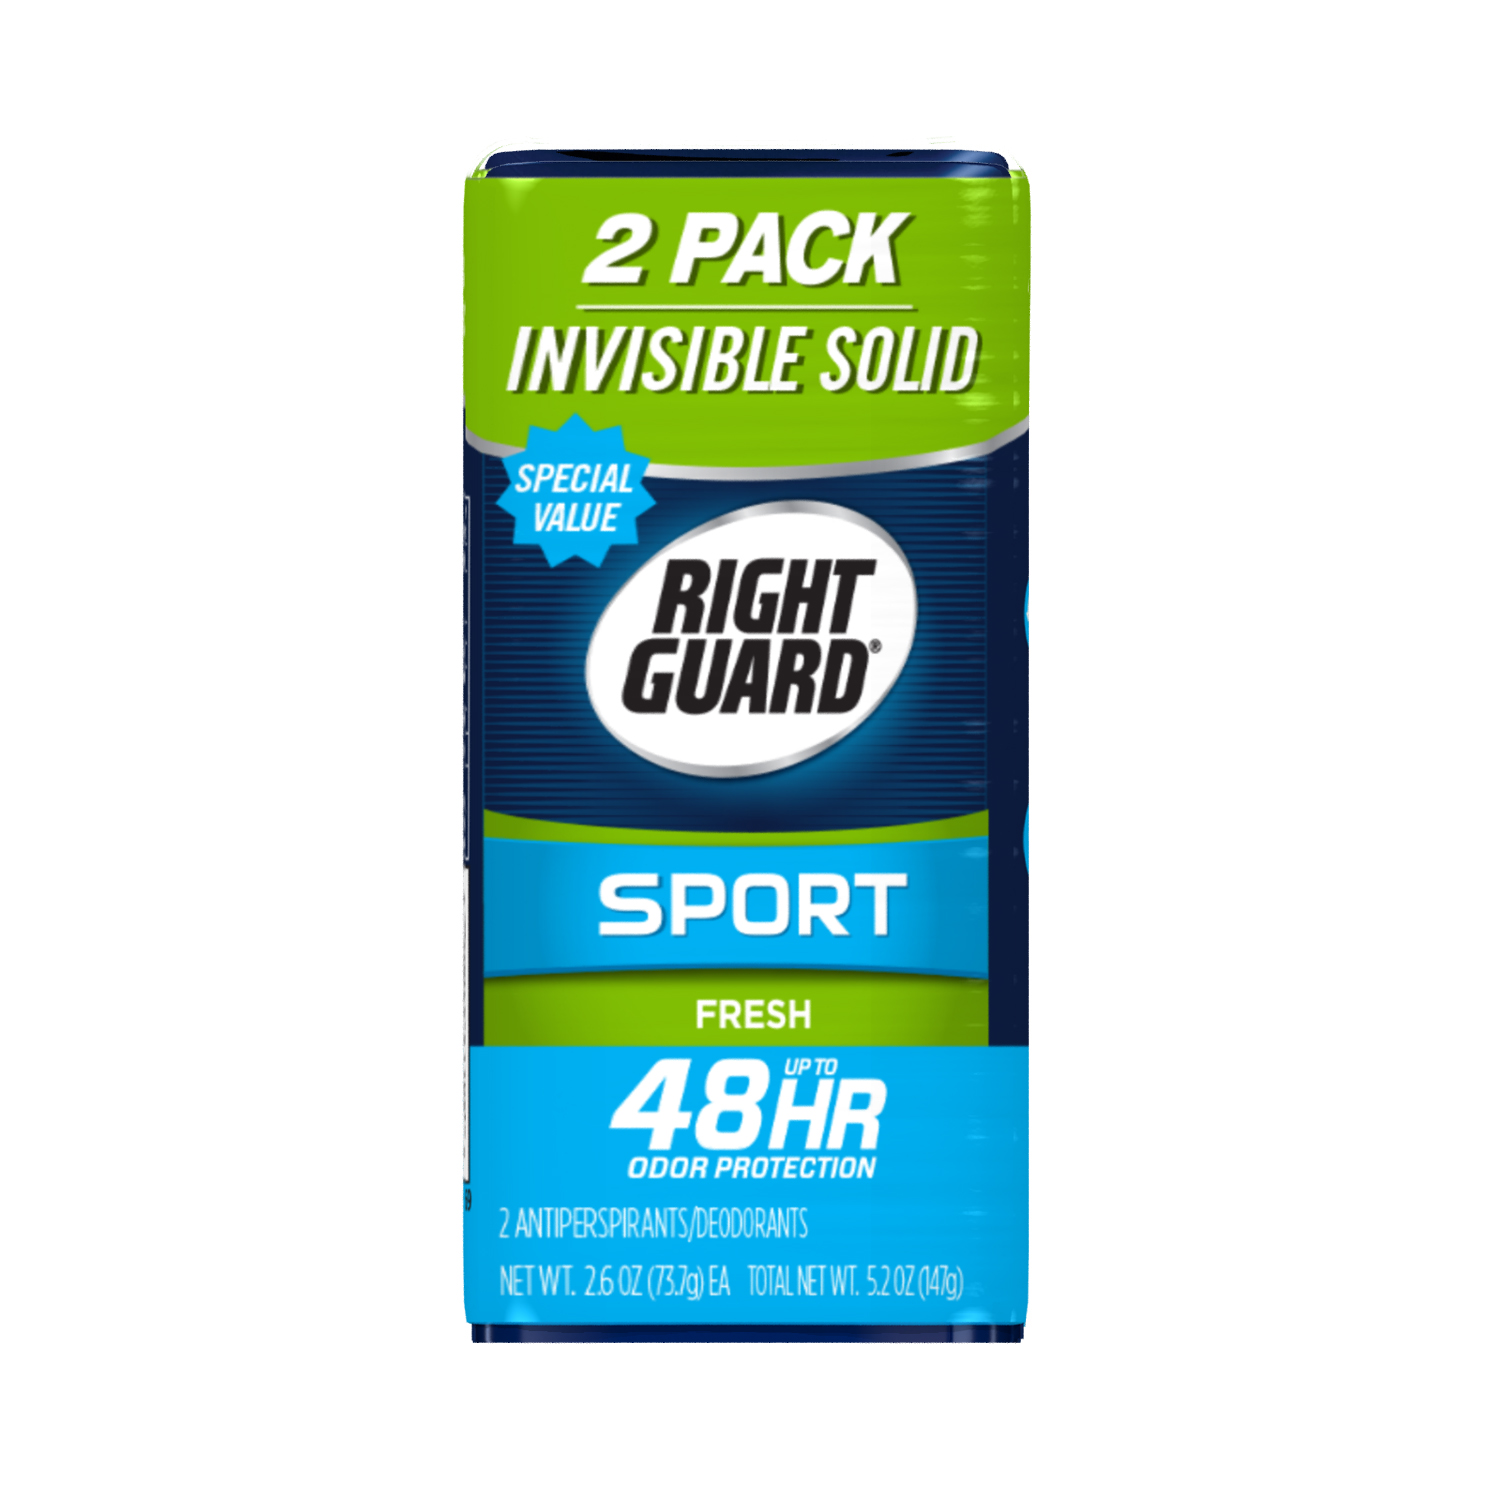 Right Guard Sport Antiperspirant Deodorant Invisible Solid Stick, Fresh, 2.6 oz (Pack of 2) - image 1 of 4